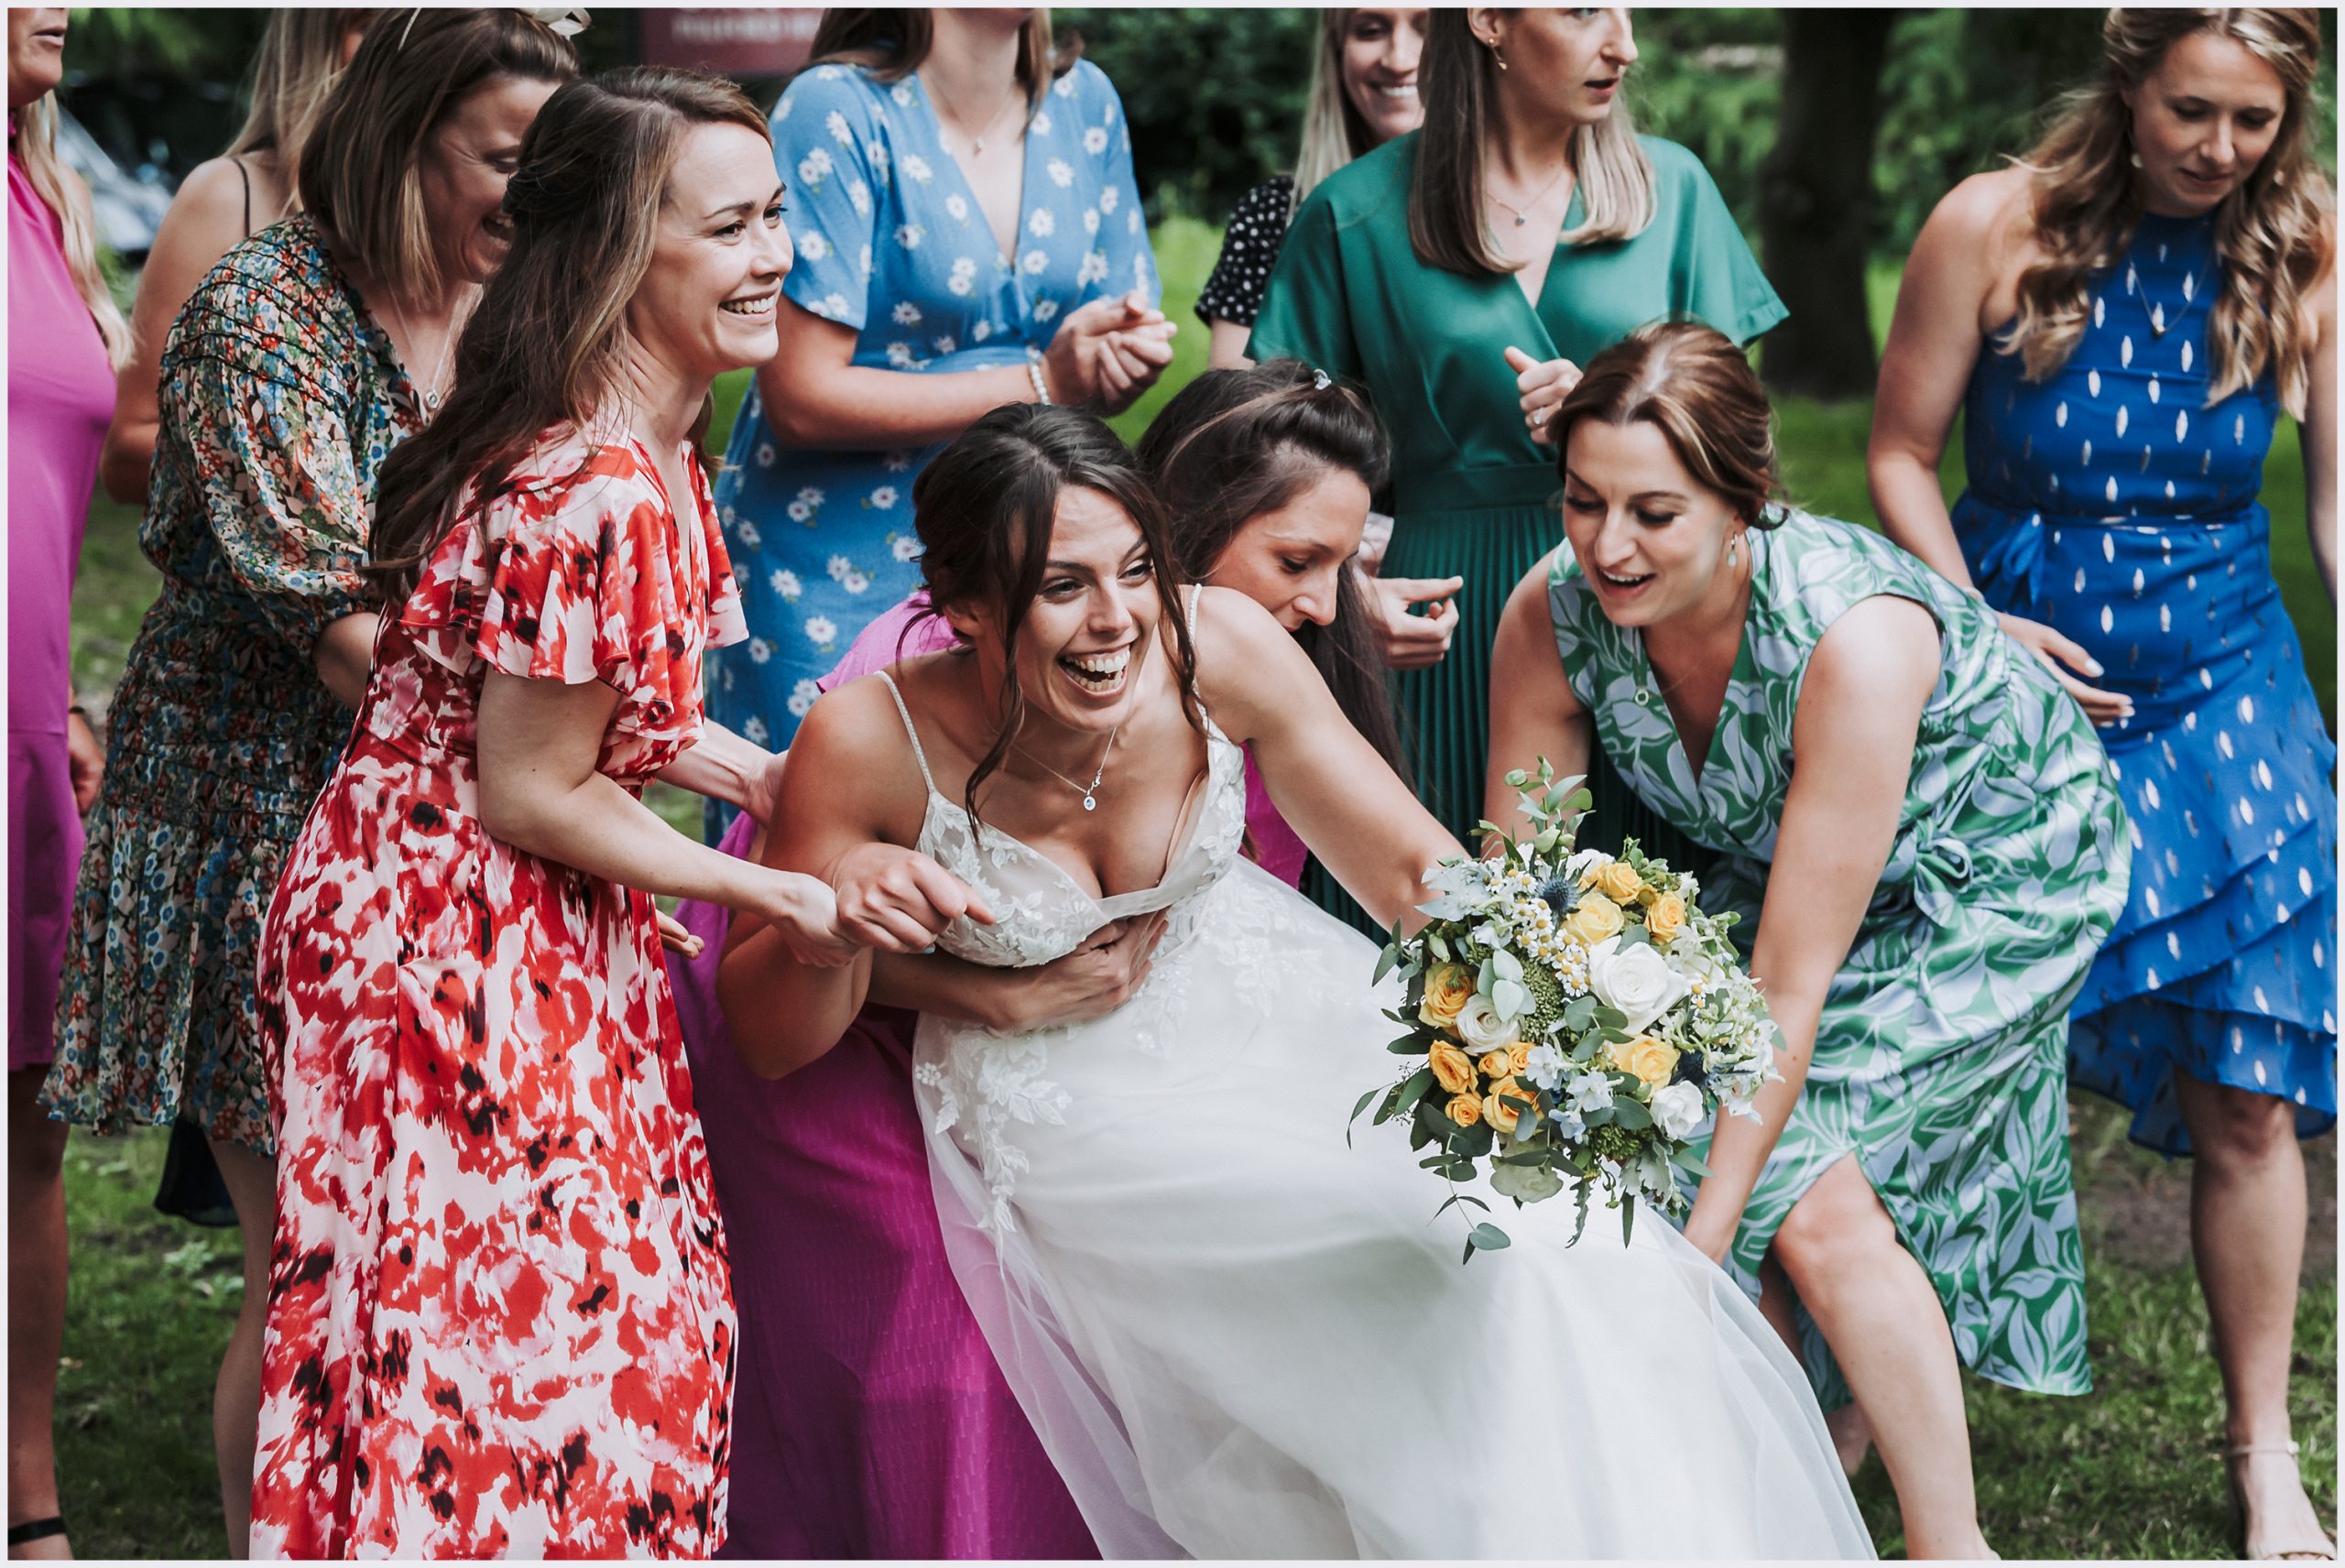 A bride falls over while joking with her girl friends.